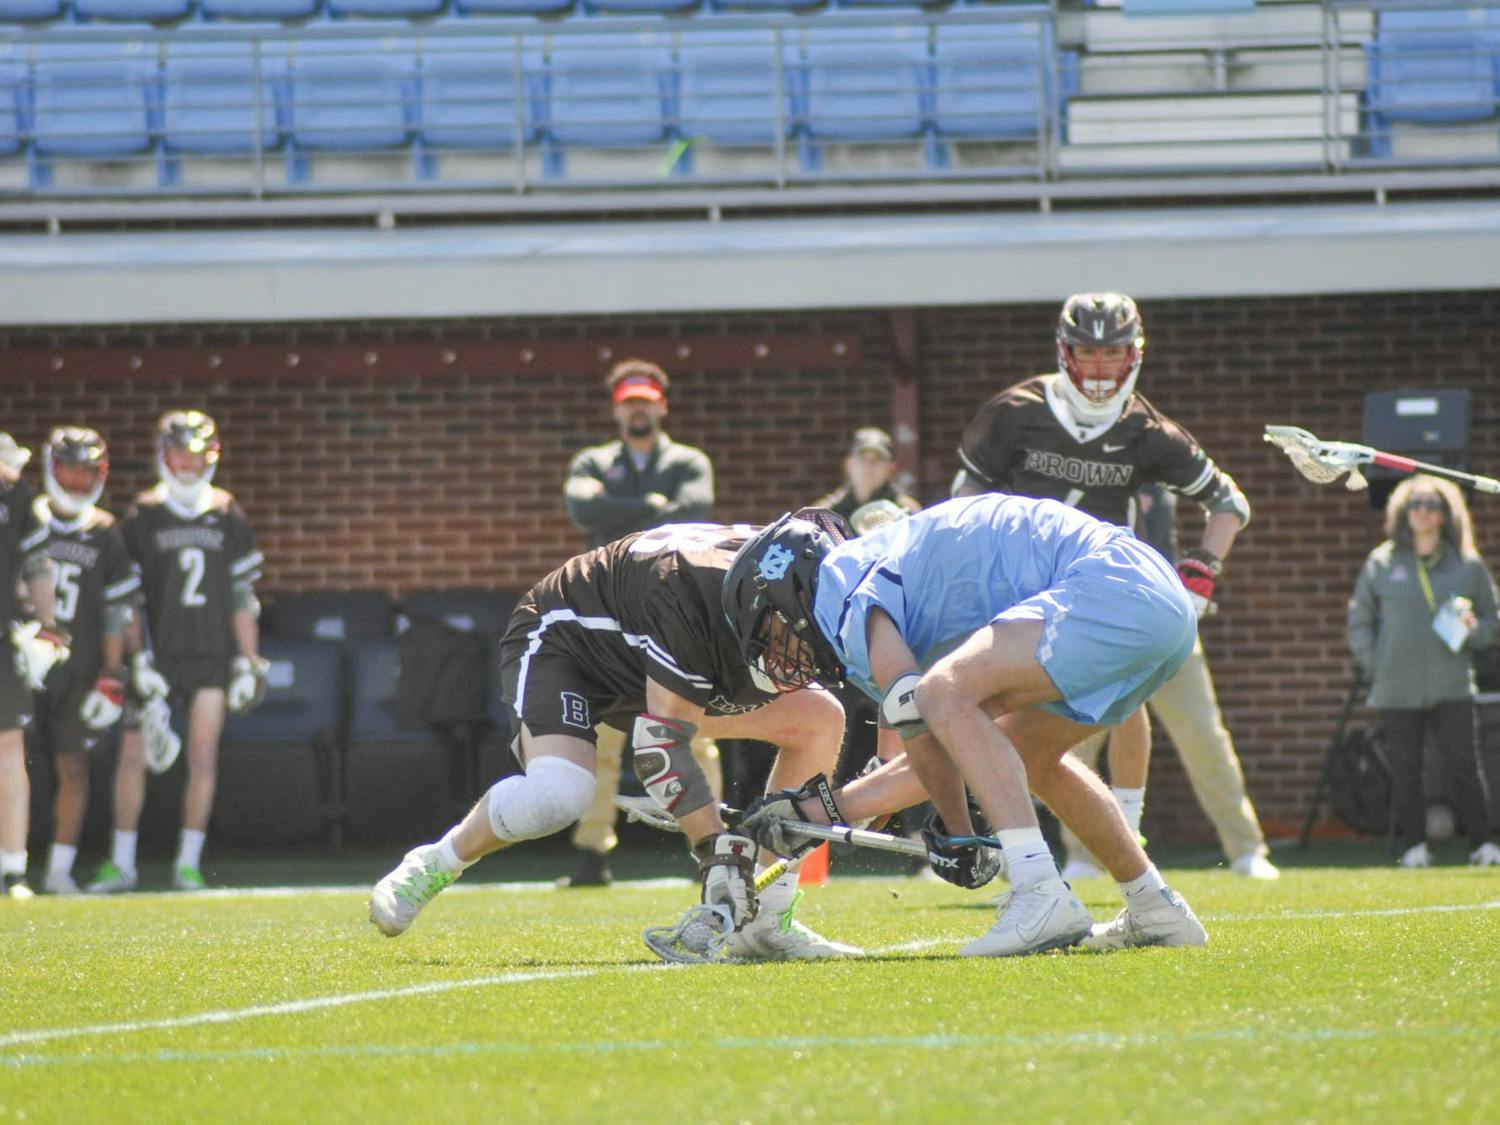 Senior face-off midfielder Andrew Tyeryar (3) takes the face-off during the men's lacrosse game against Brown at Dorrance Field on Saturday, March 11, 2023. UNC won 19-6.